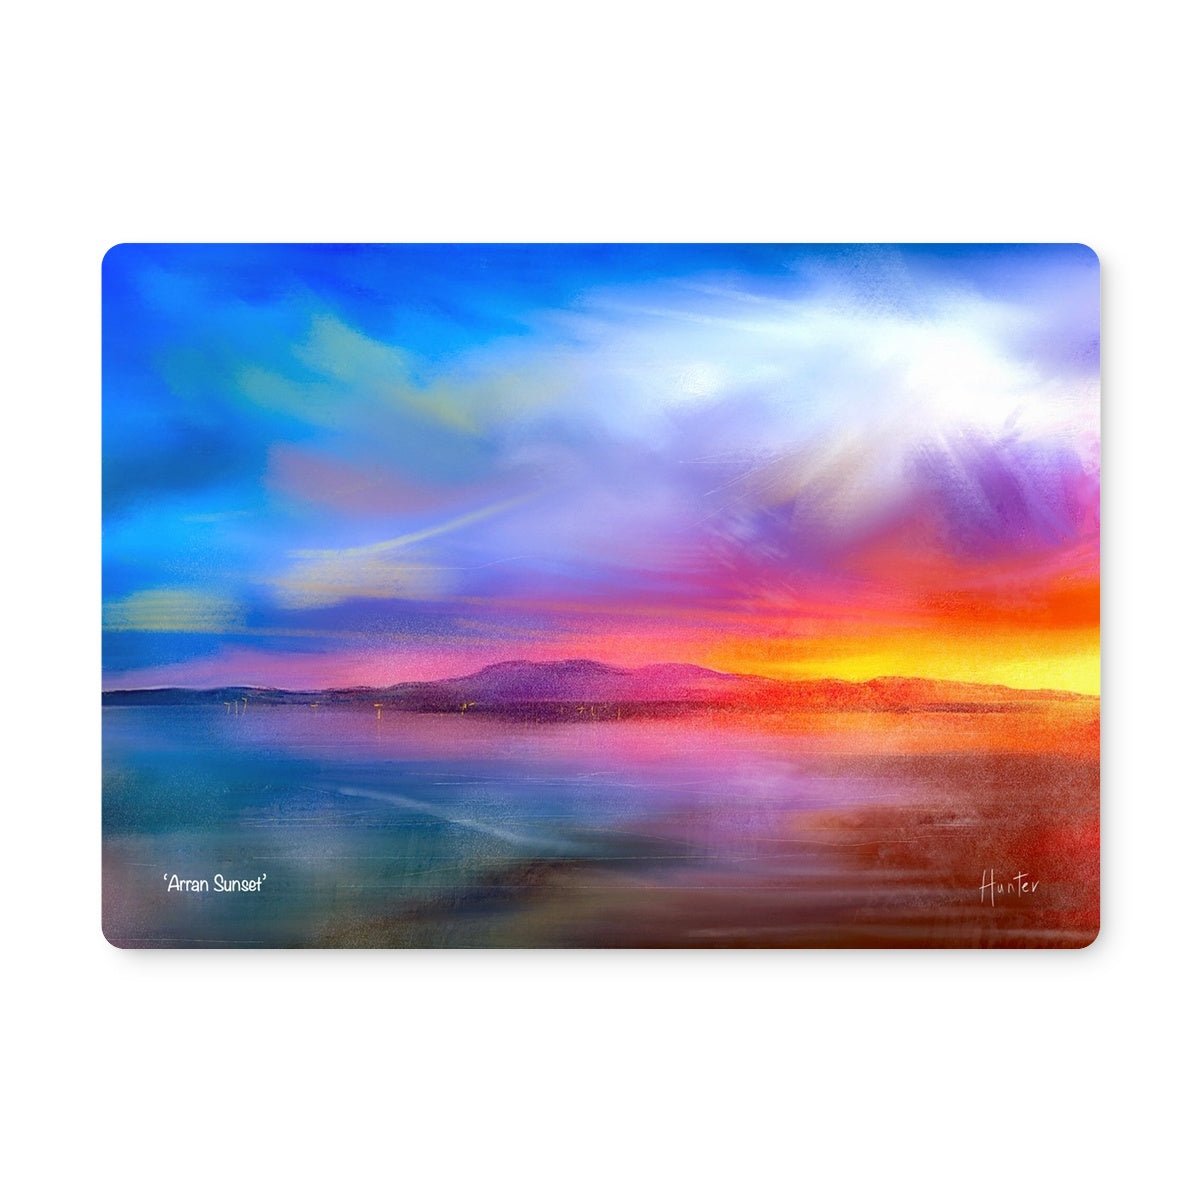 Arran Sunset Art Gifts Placemat-Placemats-Arran Art Gallery-4 Placemats-Paintings, Prints, Homeware, Art Gifts From Scotland By Scottish Artist Kevin Hunter